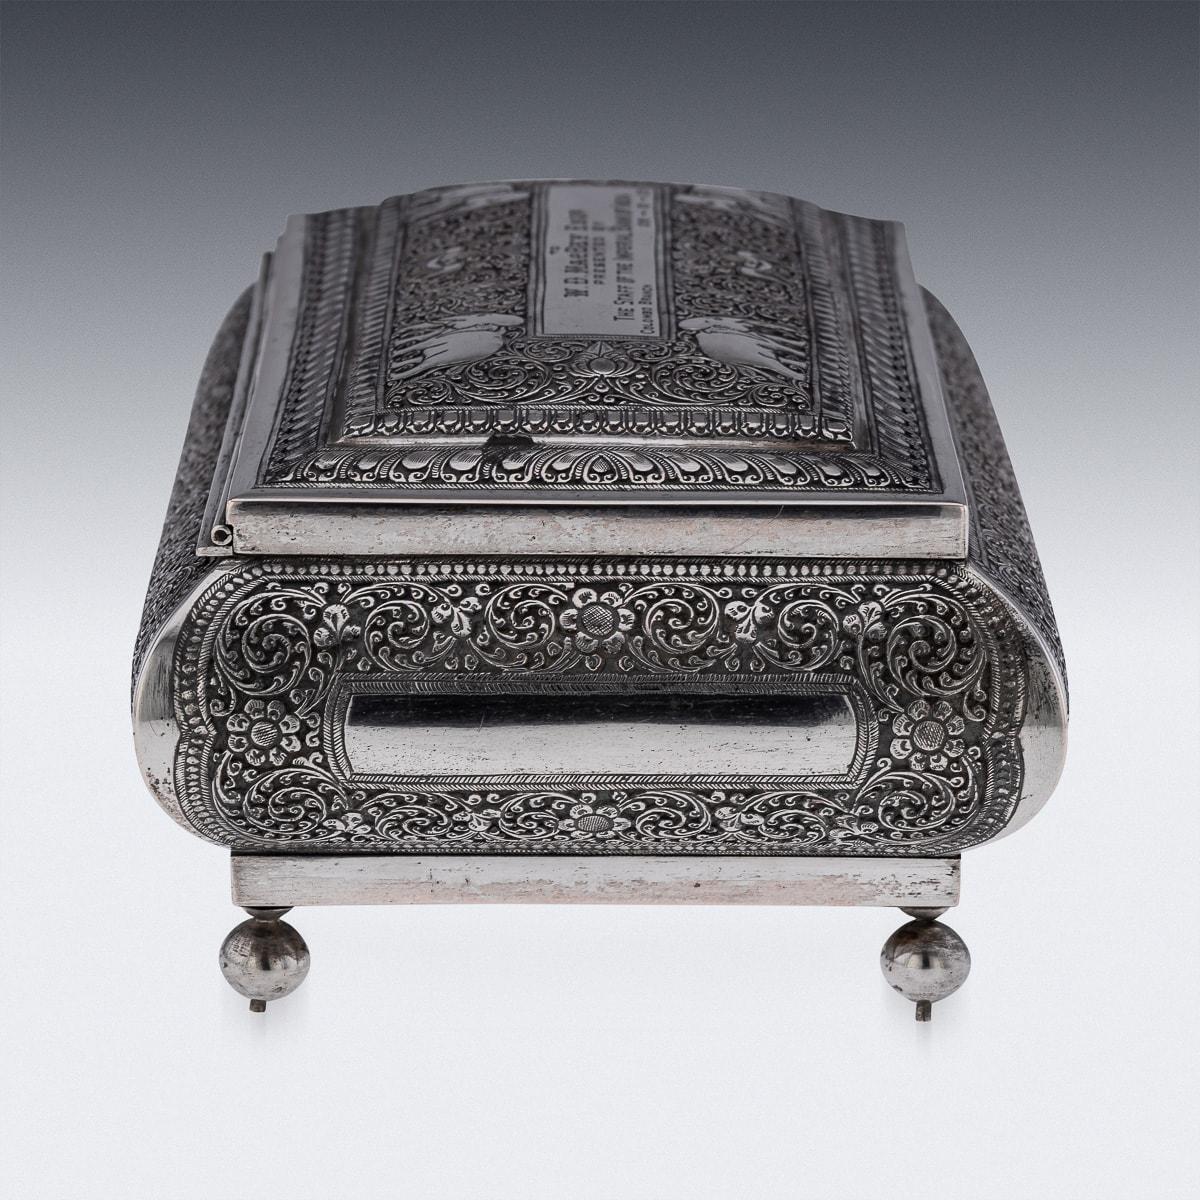 Mid 20th Century Sri Lankan Solid Silver Repousse Box, Colombo c.1930 For Sale 1